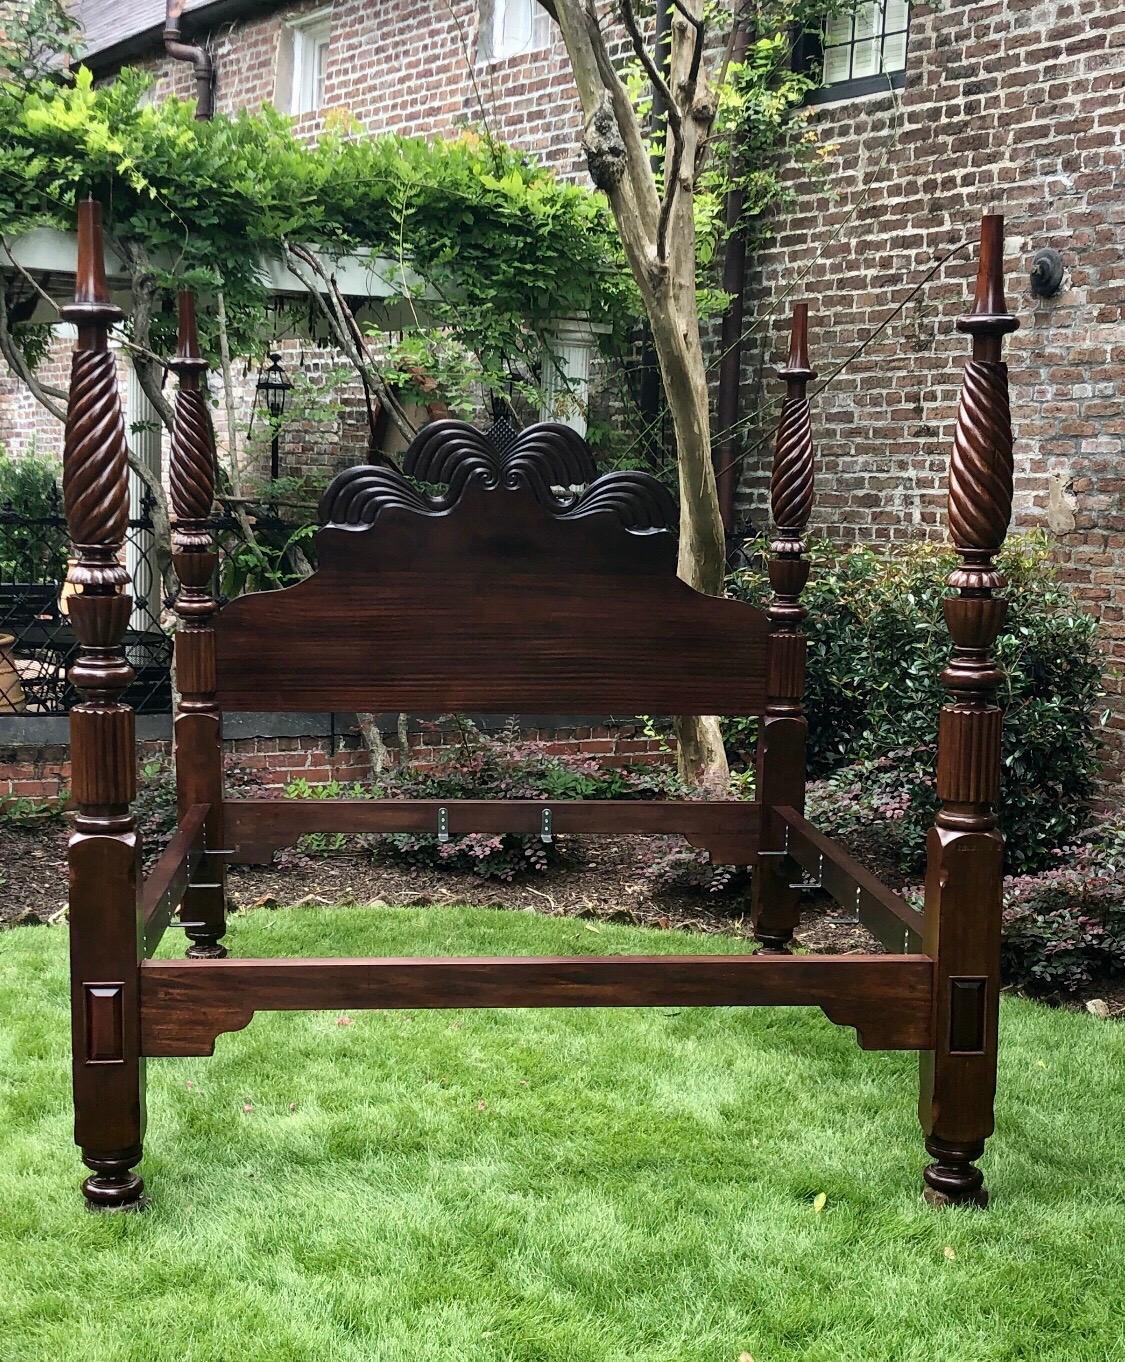 This elegant Caribbean mahogany bed was constructed in the 19th century in Jamaica. This Rare West Indies Bedstead exhibits a scarce and desirable hand carved iconic Jamaican Double Waterfall headboard which resonates with the four solid mahogany